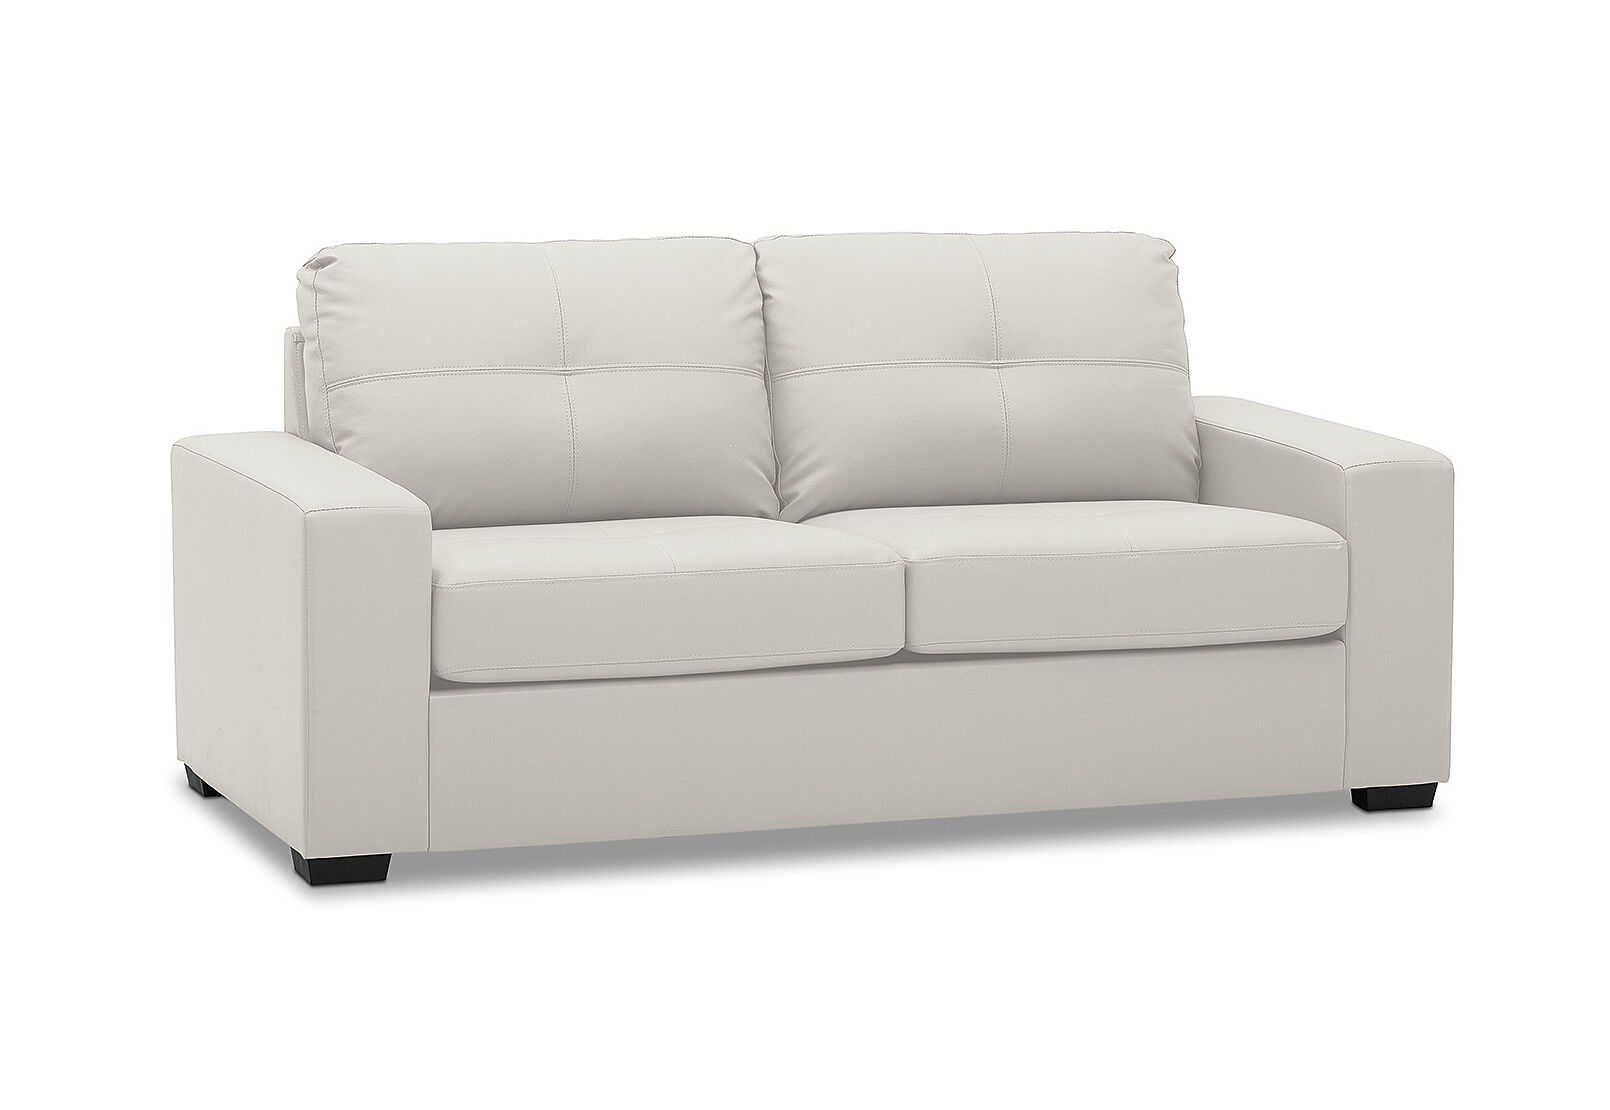 2 5 Seater Sofa Bed Amart Furniture, White Leather Loveseat Sofa Bed